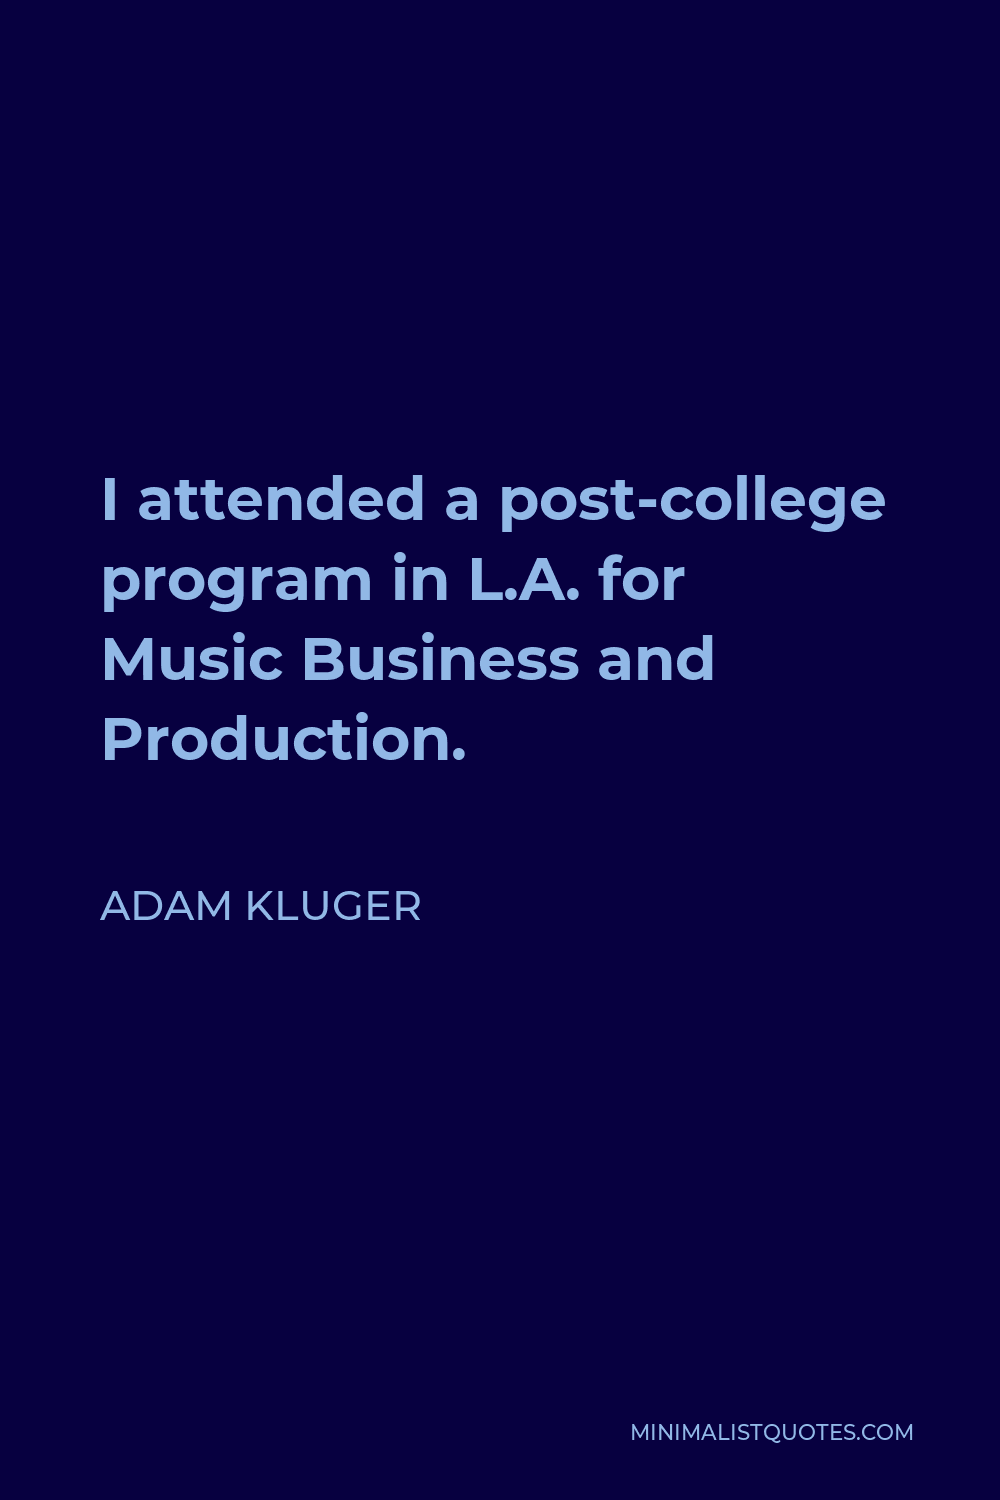 Adam Kluger Quote - I attended a post-college program in L.A. for Music Business and Production.